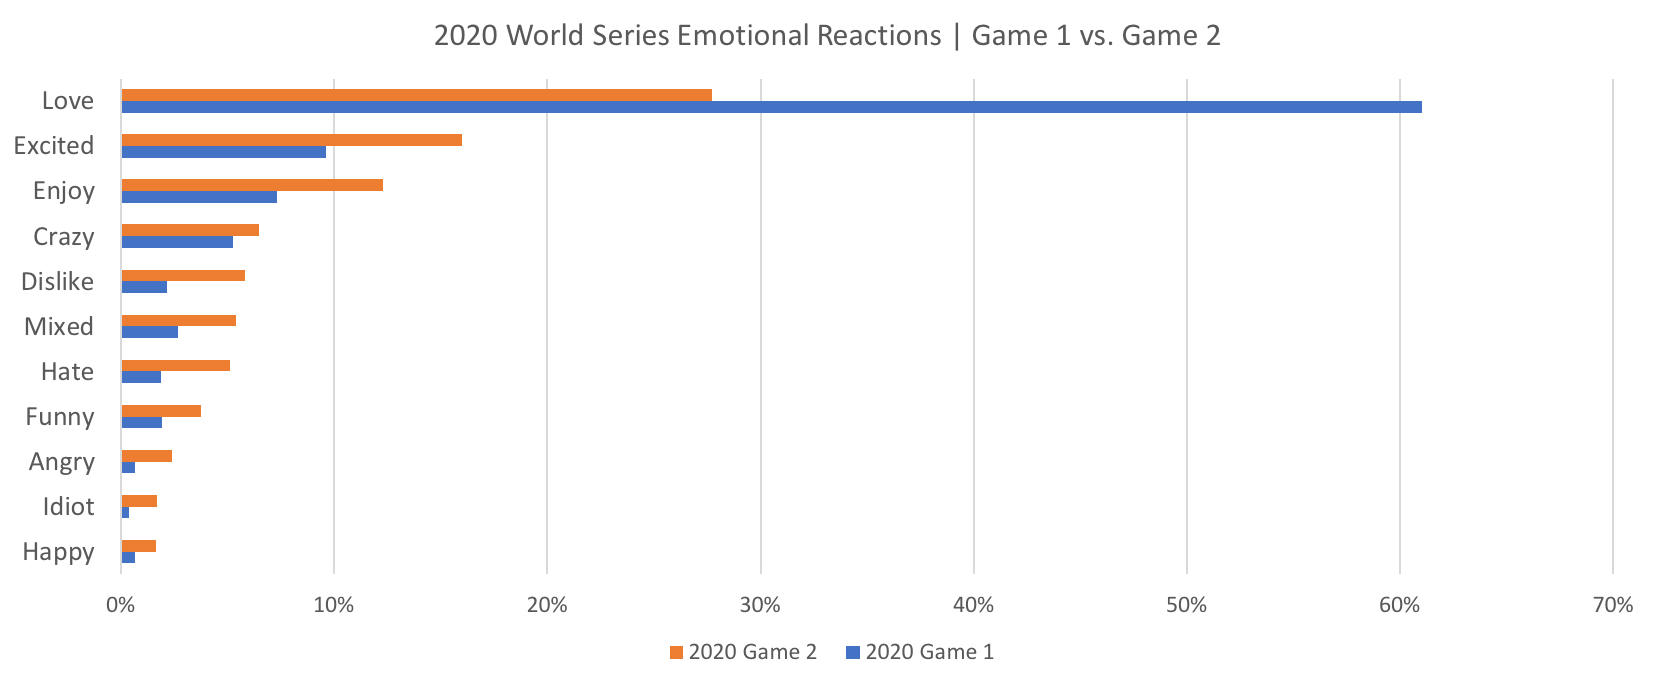 Source: Canvs Compare, World Series Games 1 & 2, Emotional Reactions in Airing Window + / - 3 Hours